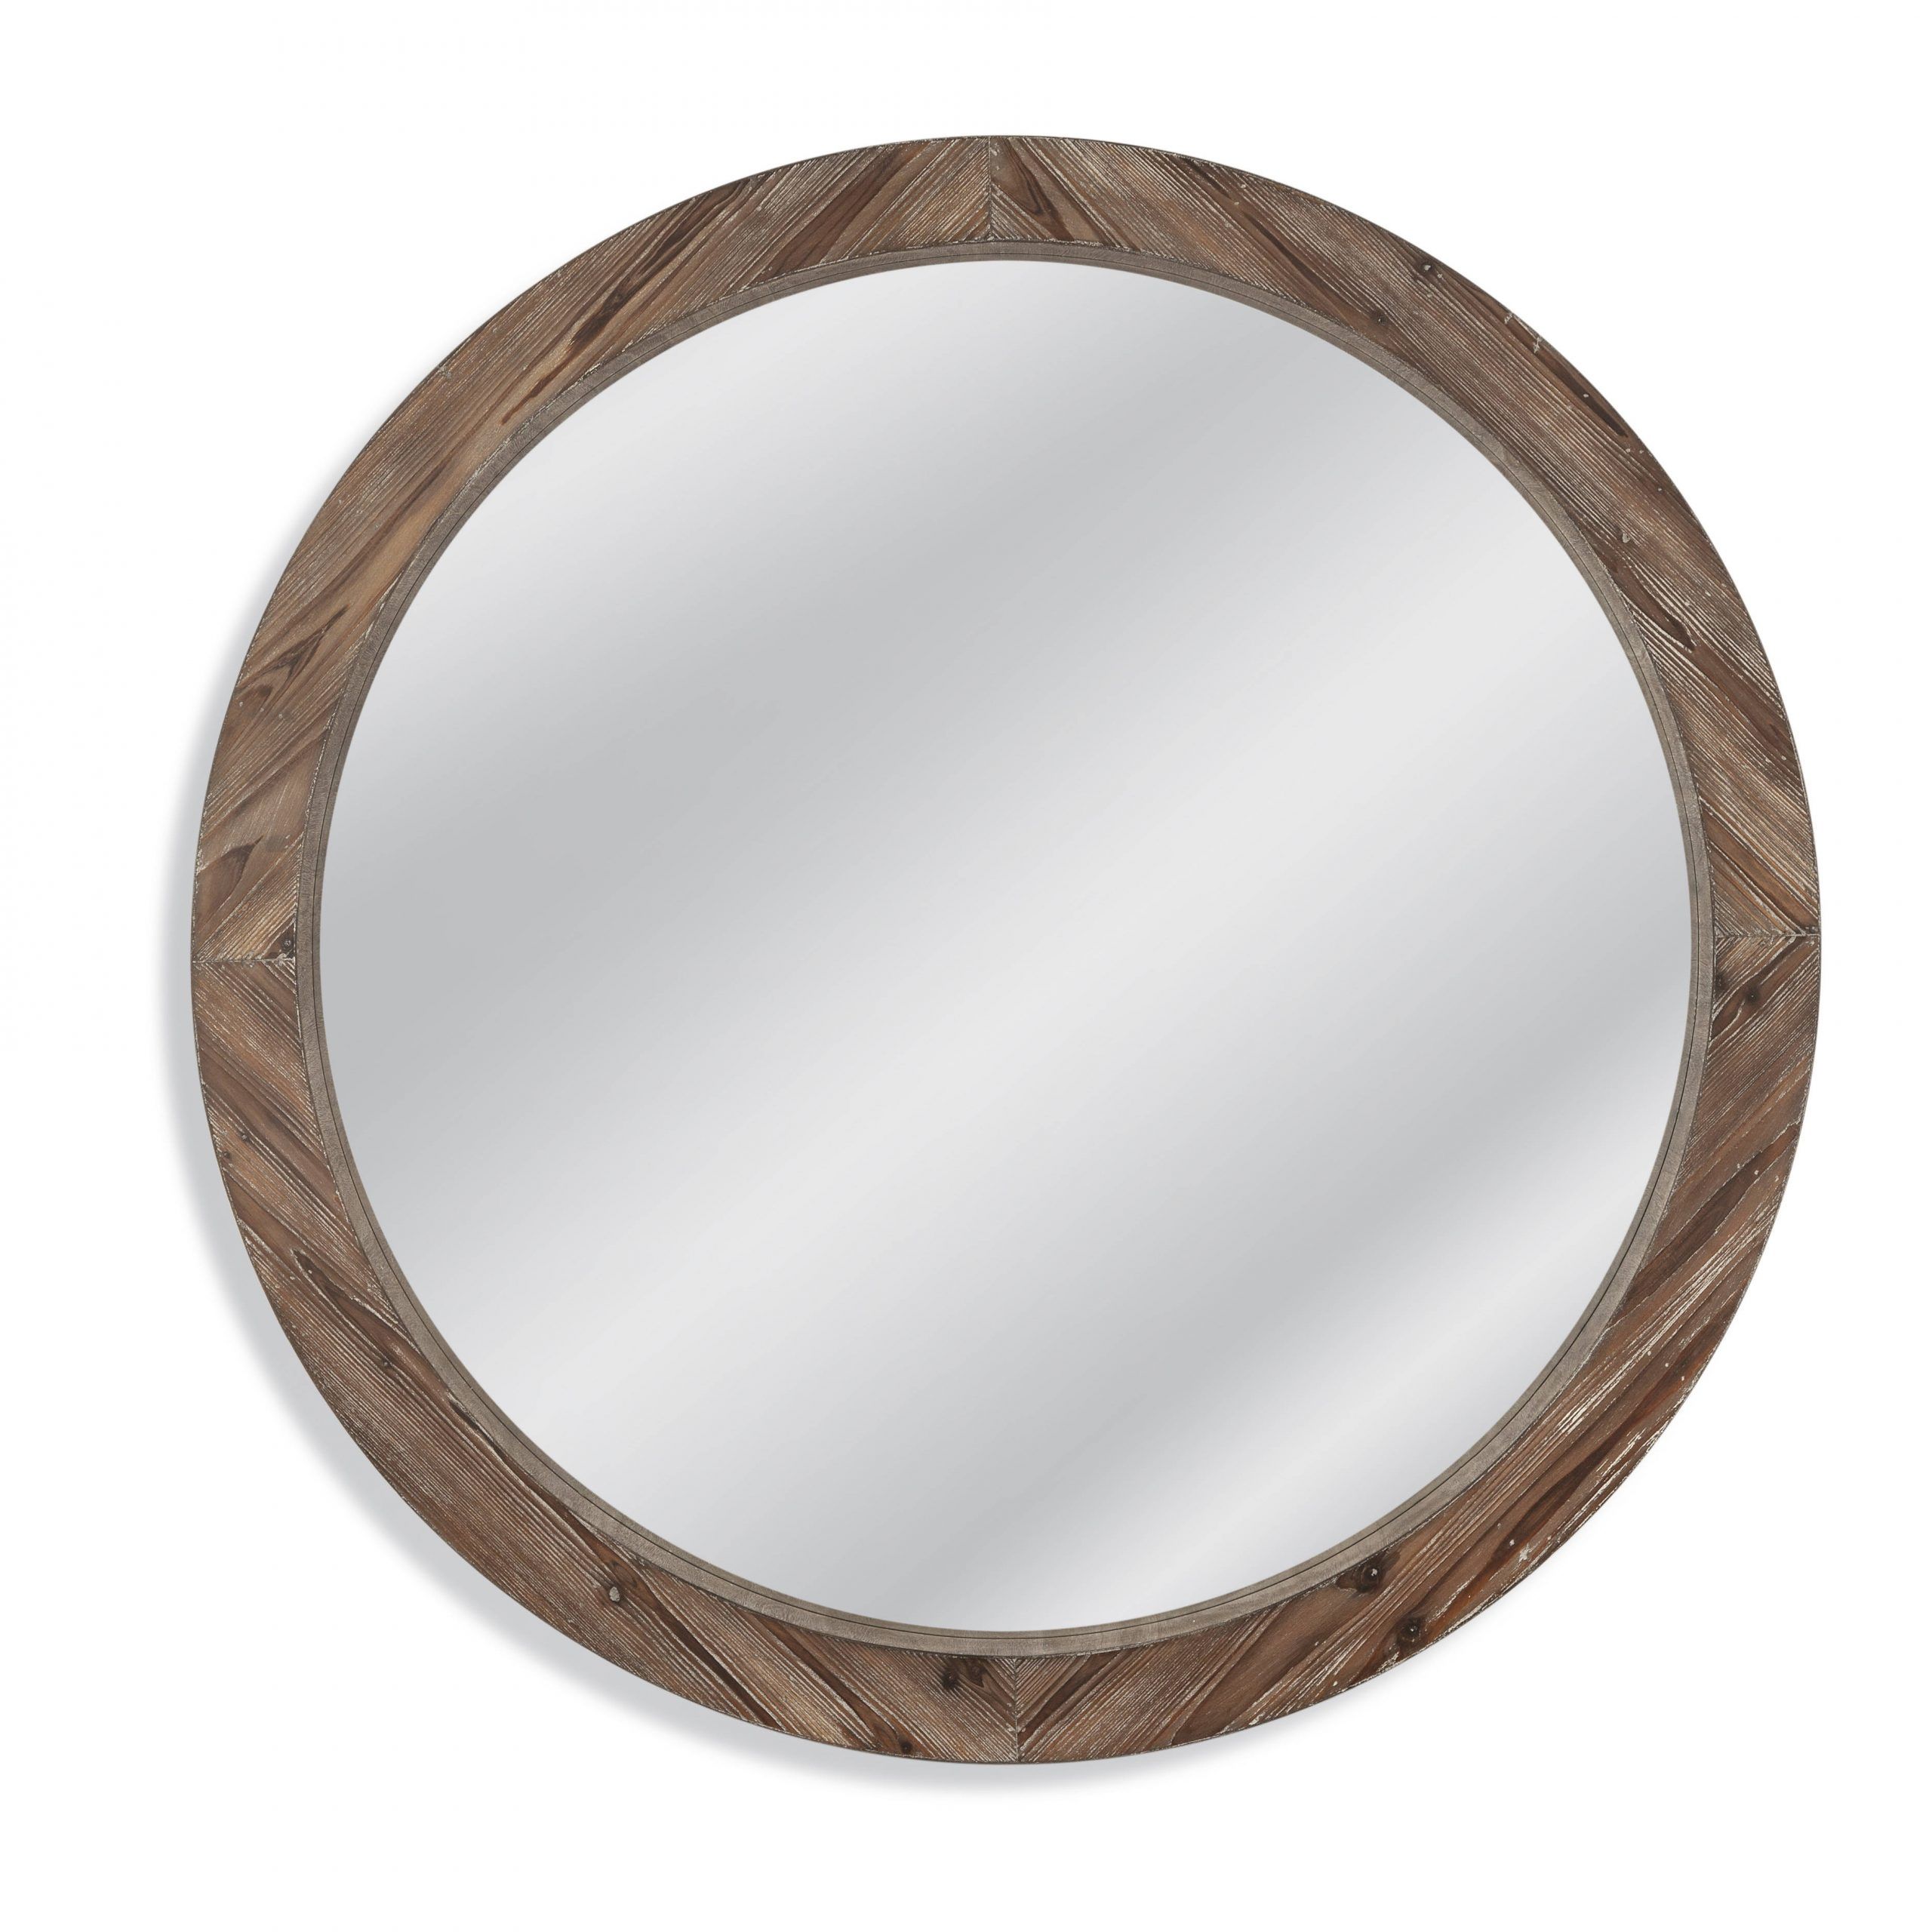 Bassett Mirror Jacques Natural Wood Round Wall Mirror | The Classy Home Within Organic Natural Wood Round Wall Mirrors (View 14 of 15)